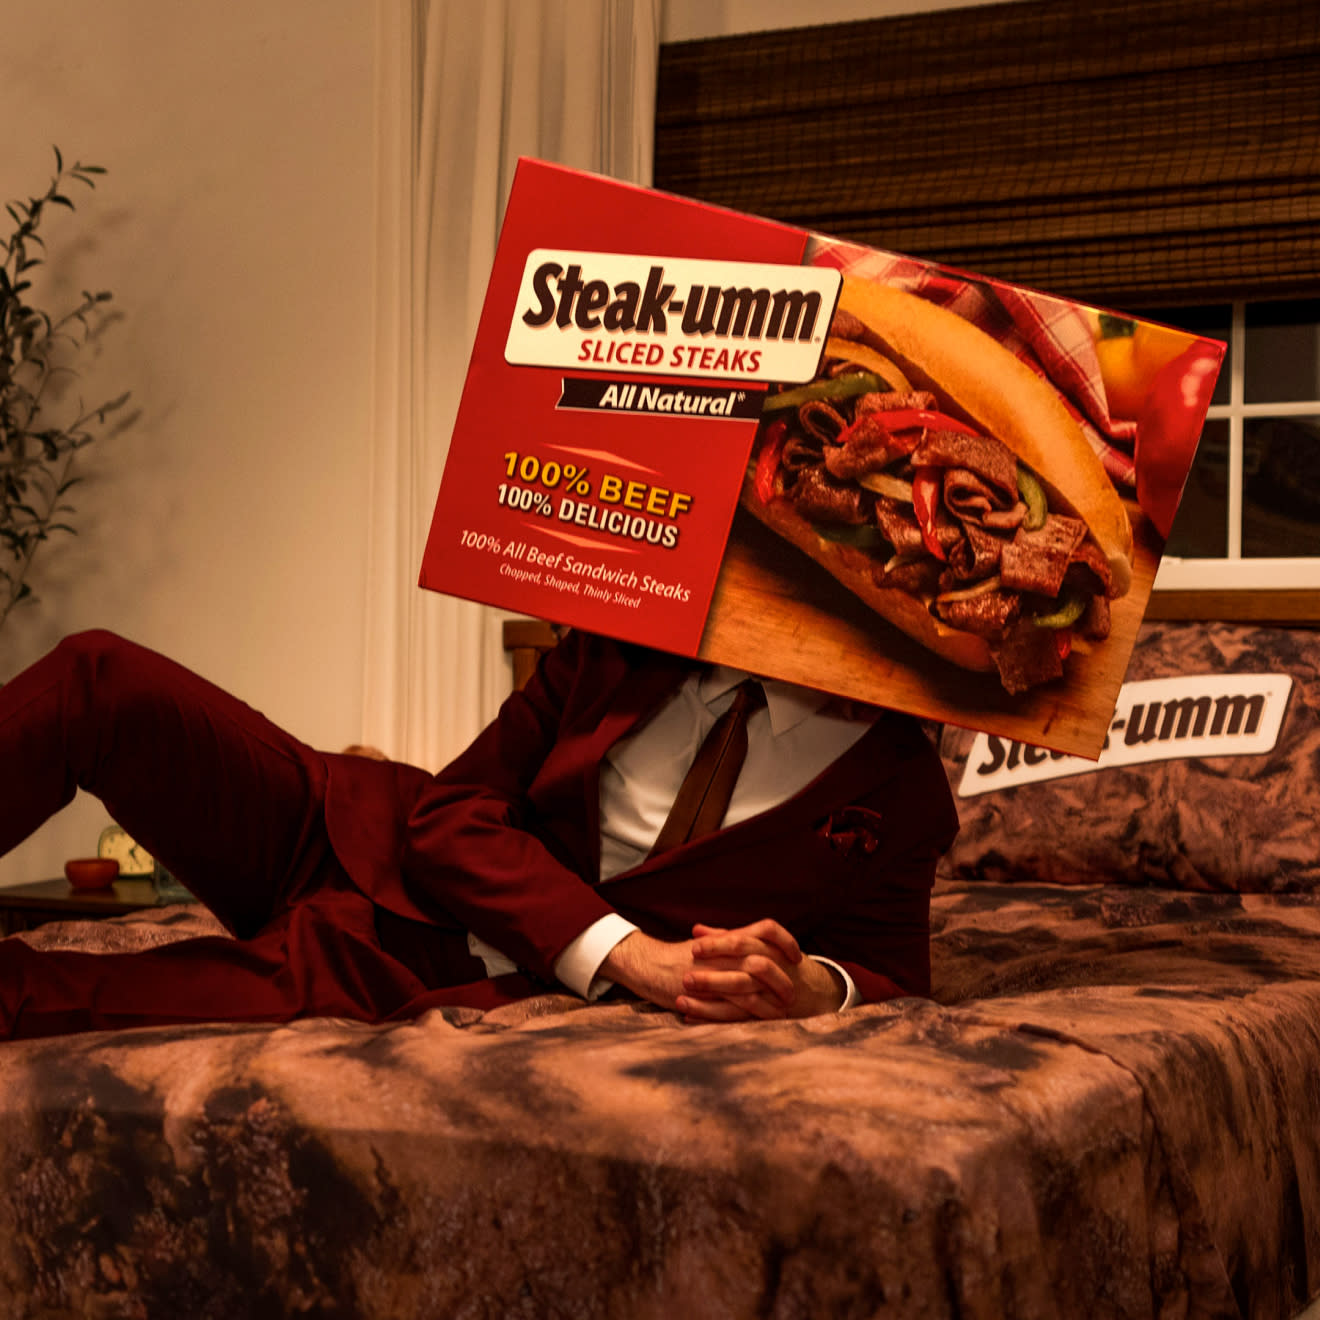 Steak-Umm Beef Sheets promo of a man lying on a bed covered in Beef Sheets sheets